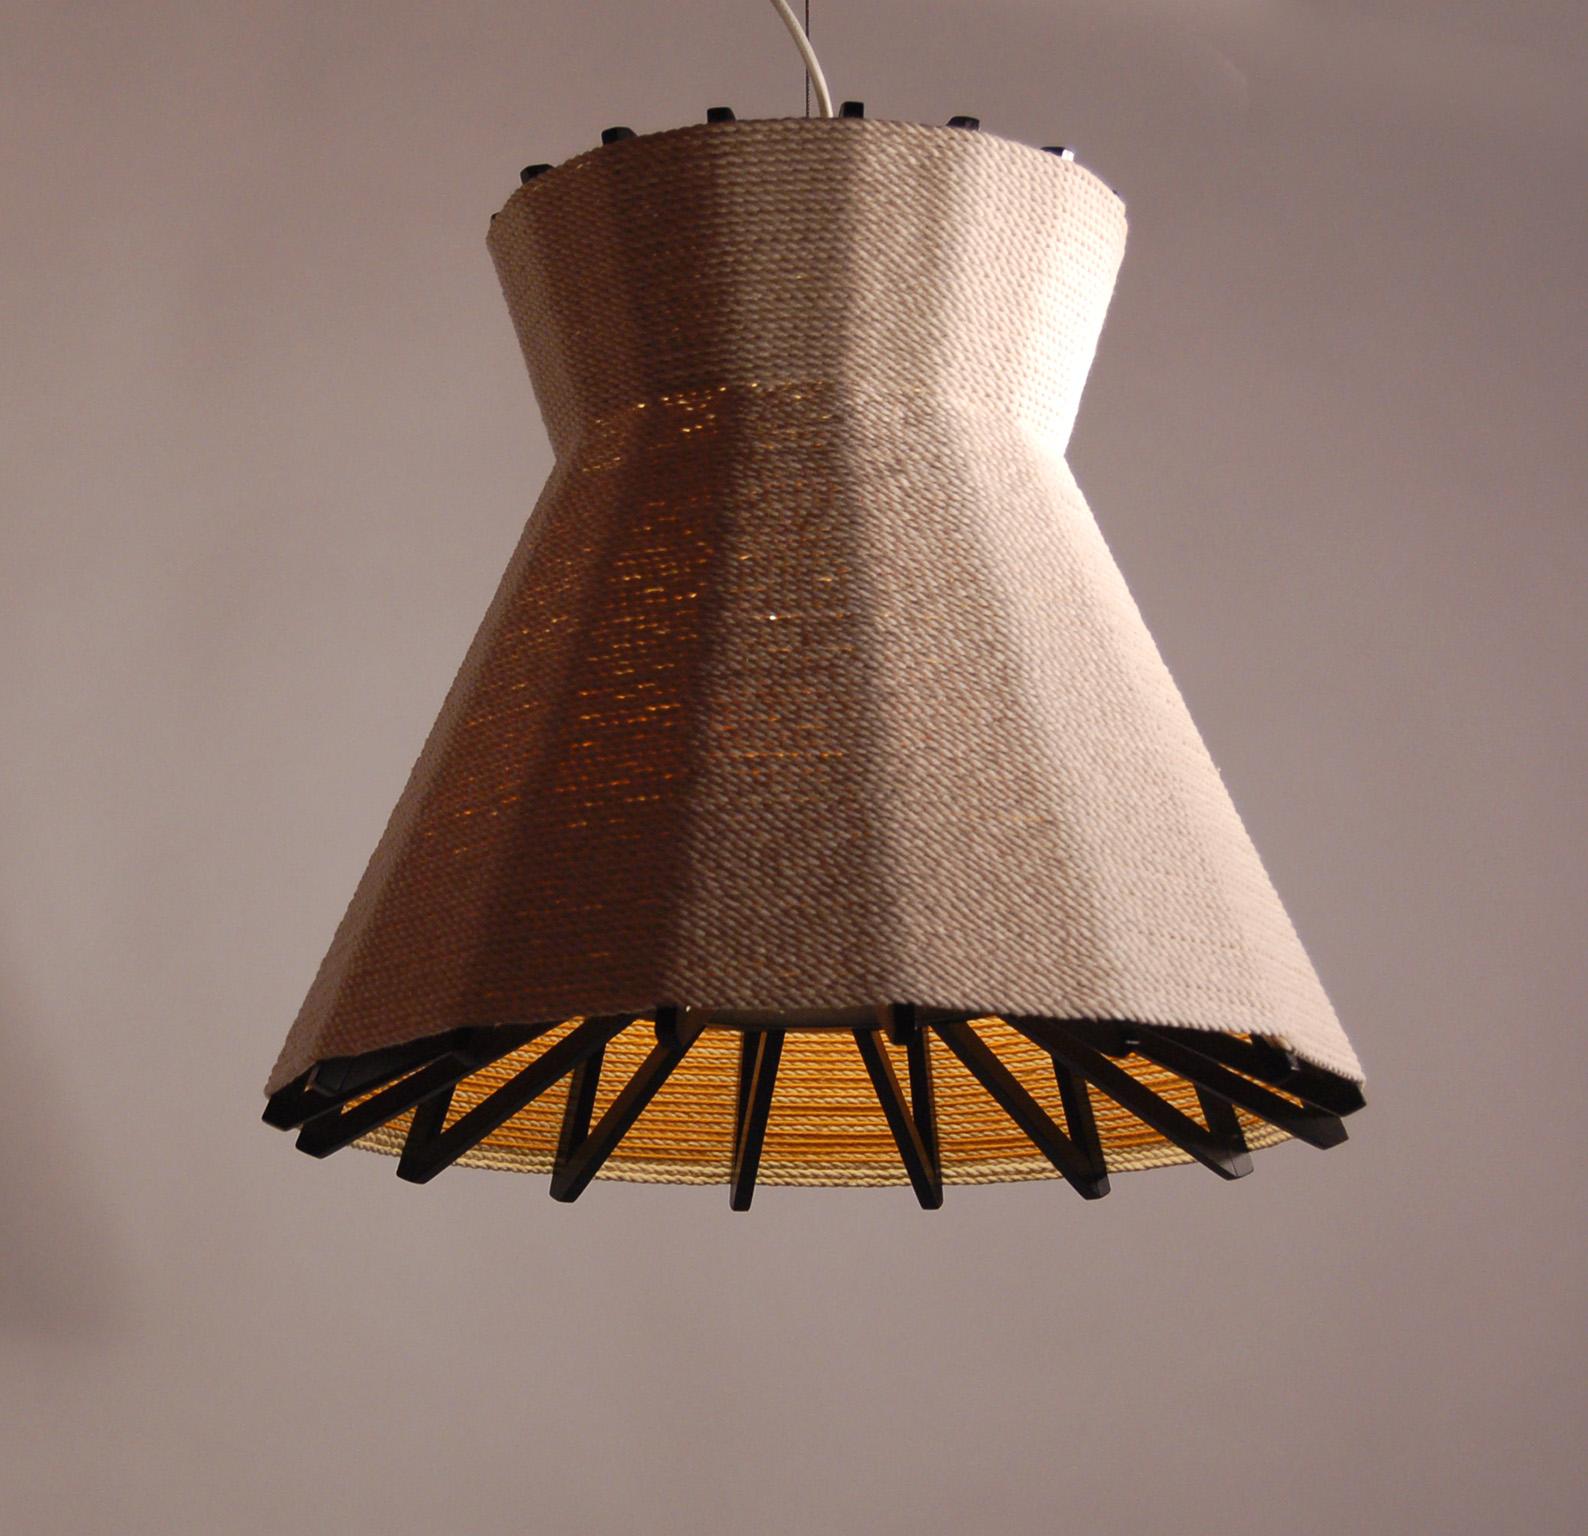 The wrapped lamp combines the warmth of cotton and wool around an exposed blackened wood frame to create a miniature roof canopy. The shaded down light creates an intimate scene above a dining table. Standard fixture comes with interior accents of